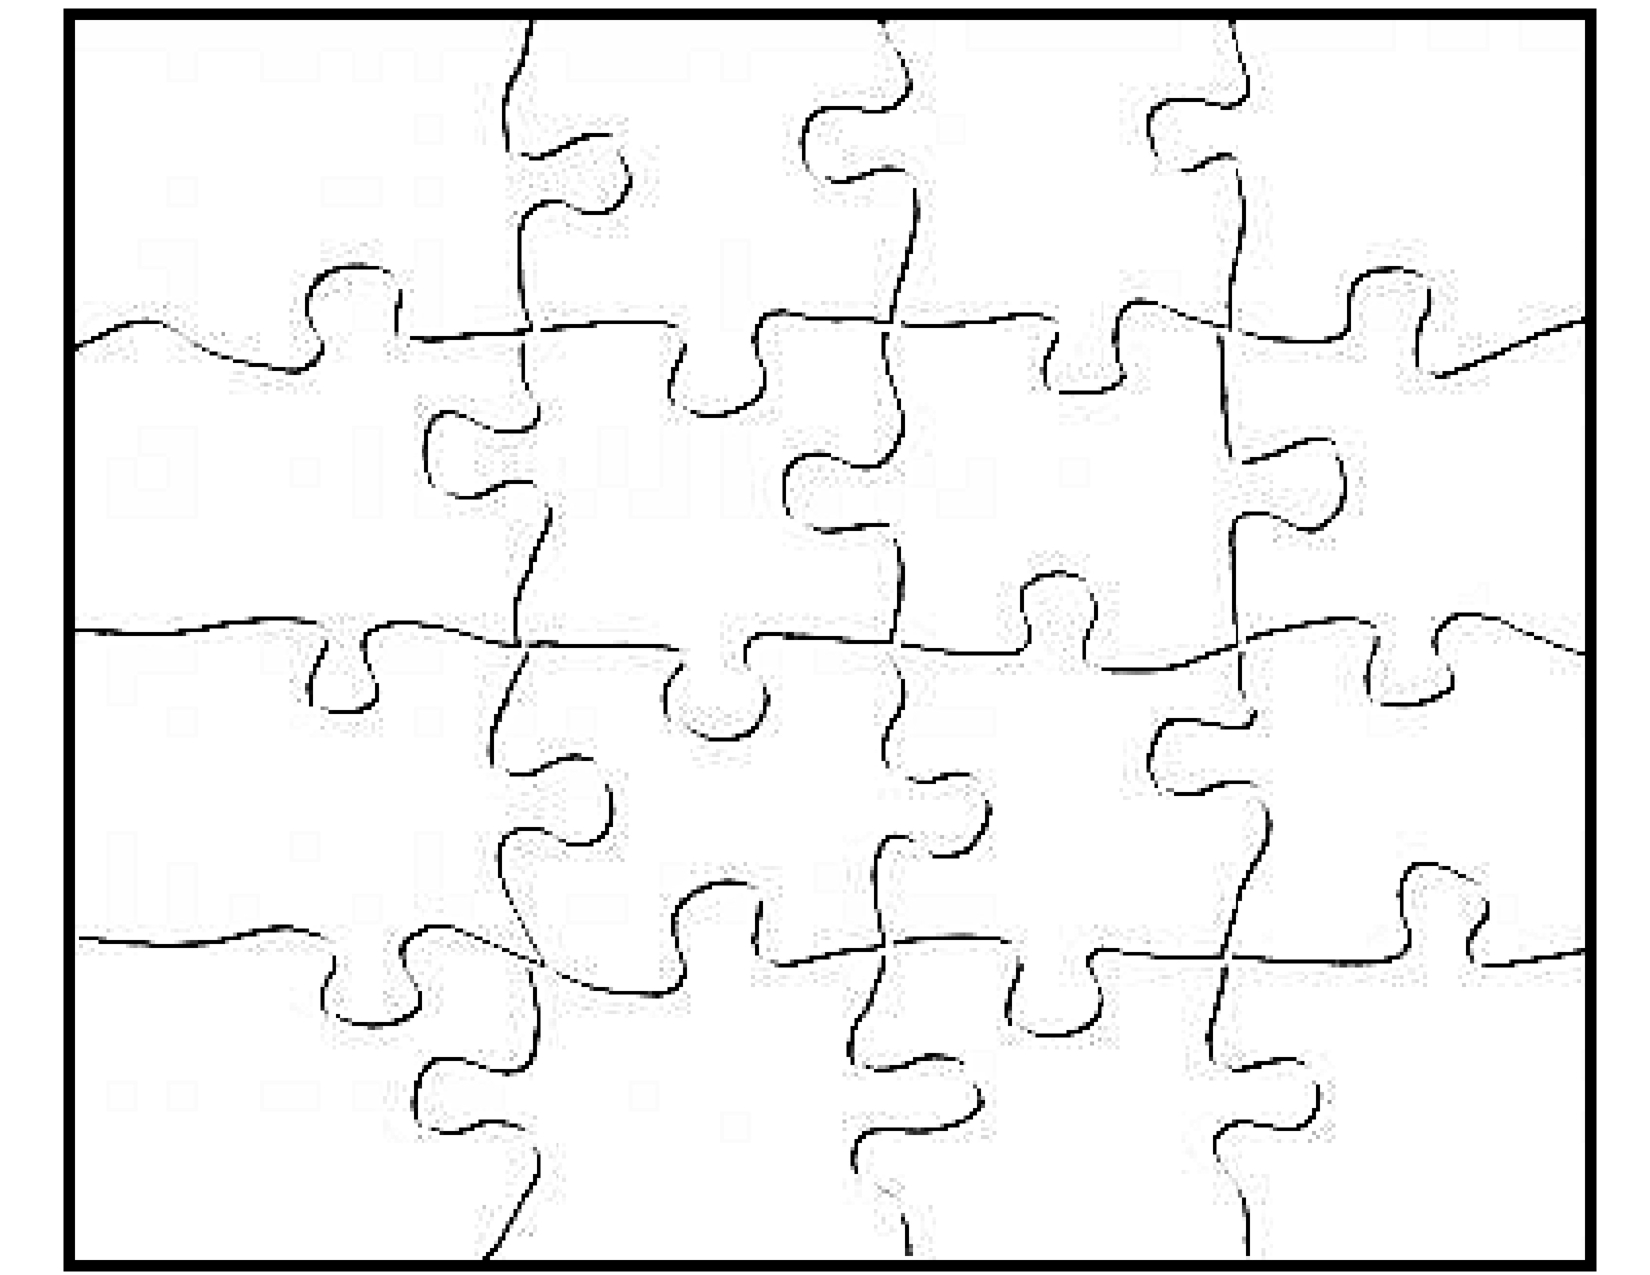 Free Puzzle Template, Download Free Clip Art, Free Clip Art On - Printable Jigsaw Puzzles 6 Pieces